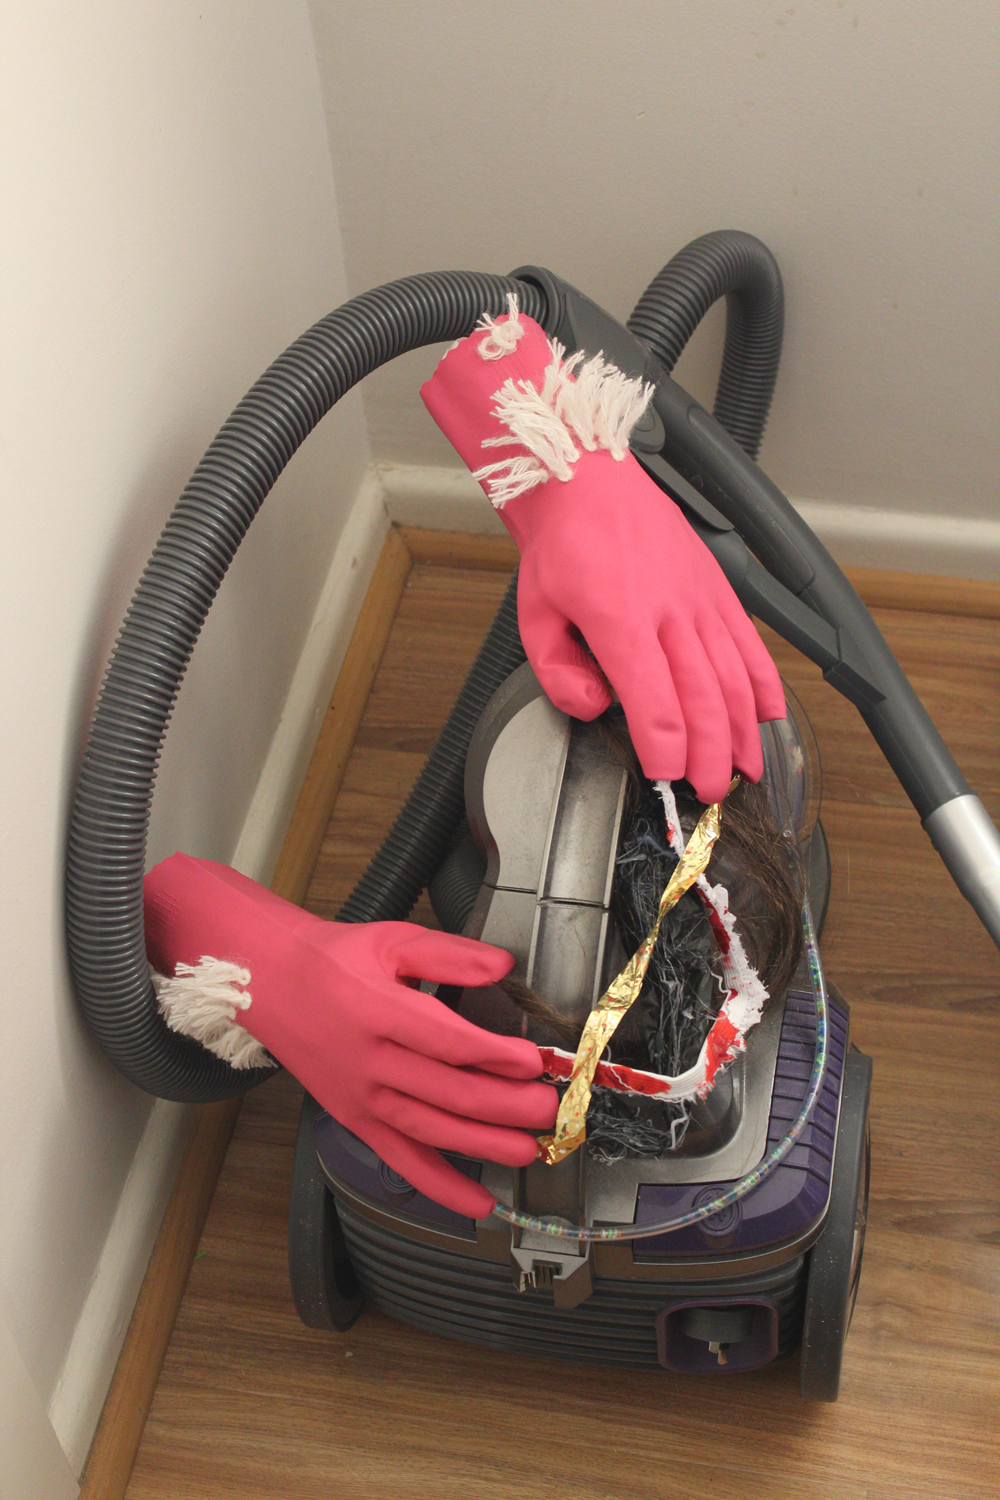 Pink rubber gloves latch-hooked with white wool and connected by various materials